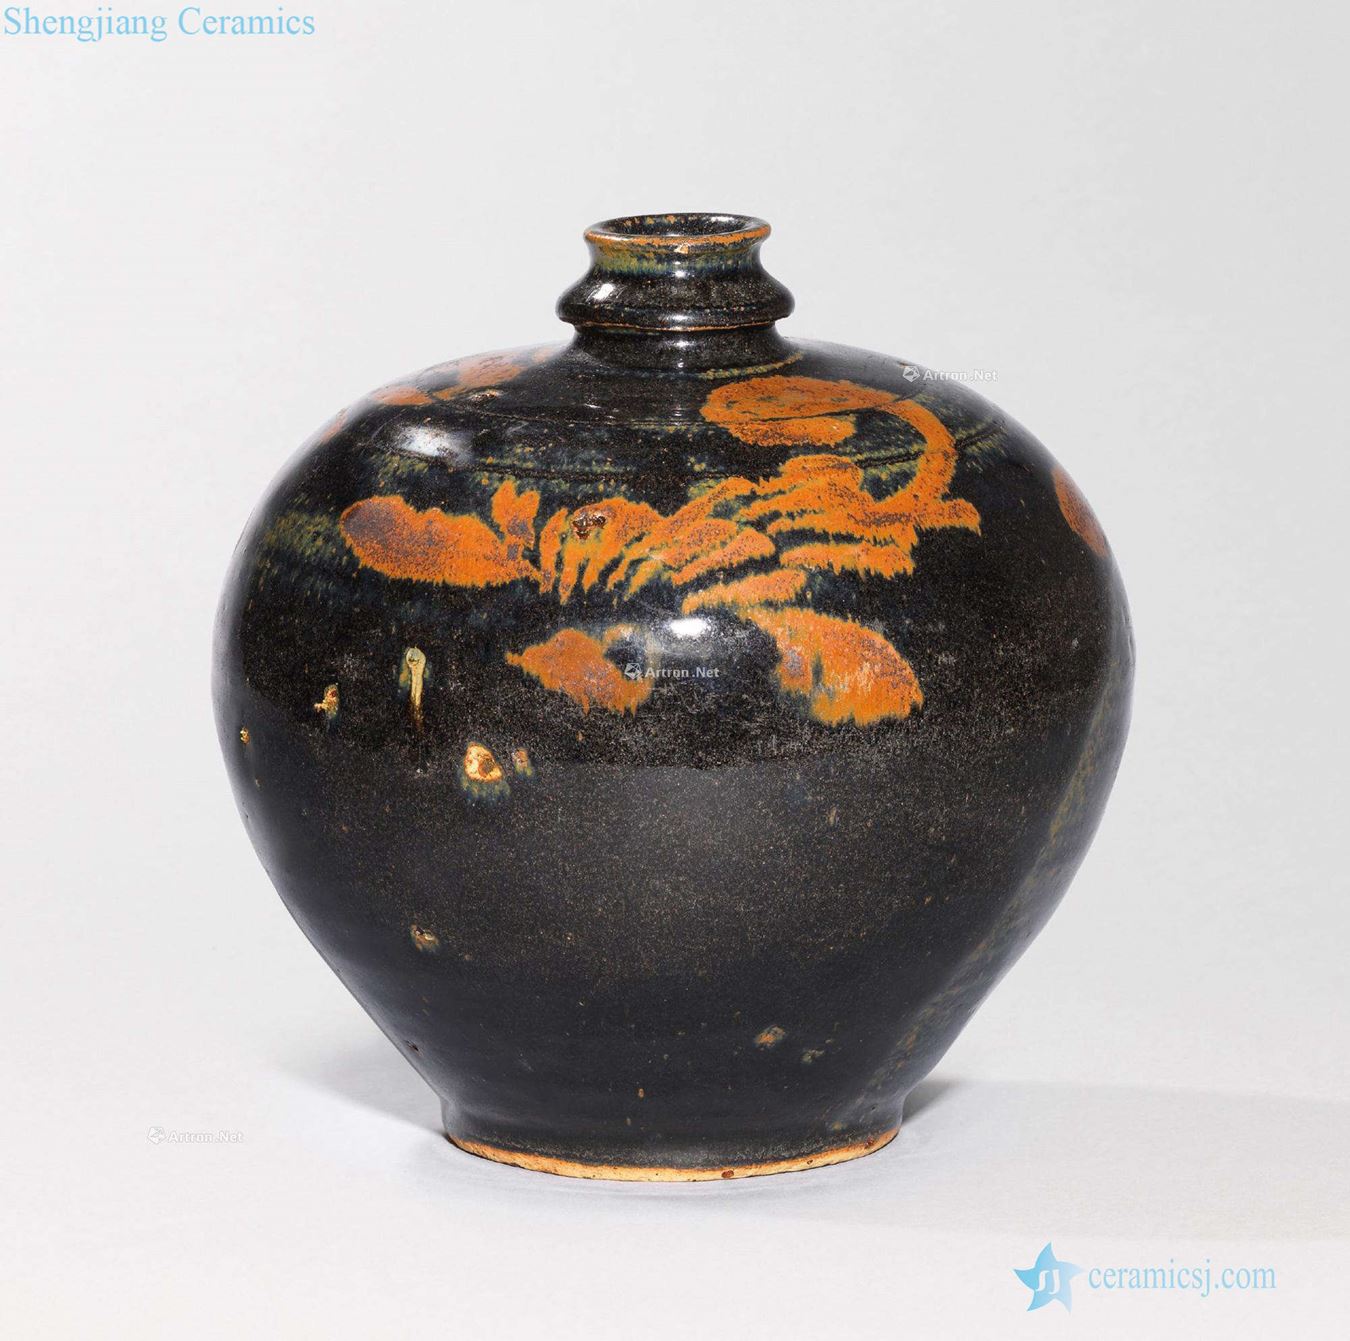 The northern song dynasty black glaze painting bird patterns bottle iron rust stain